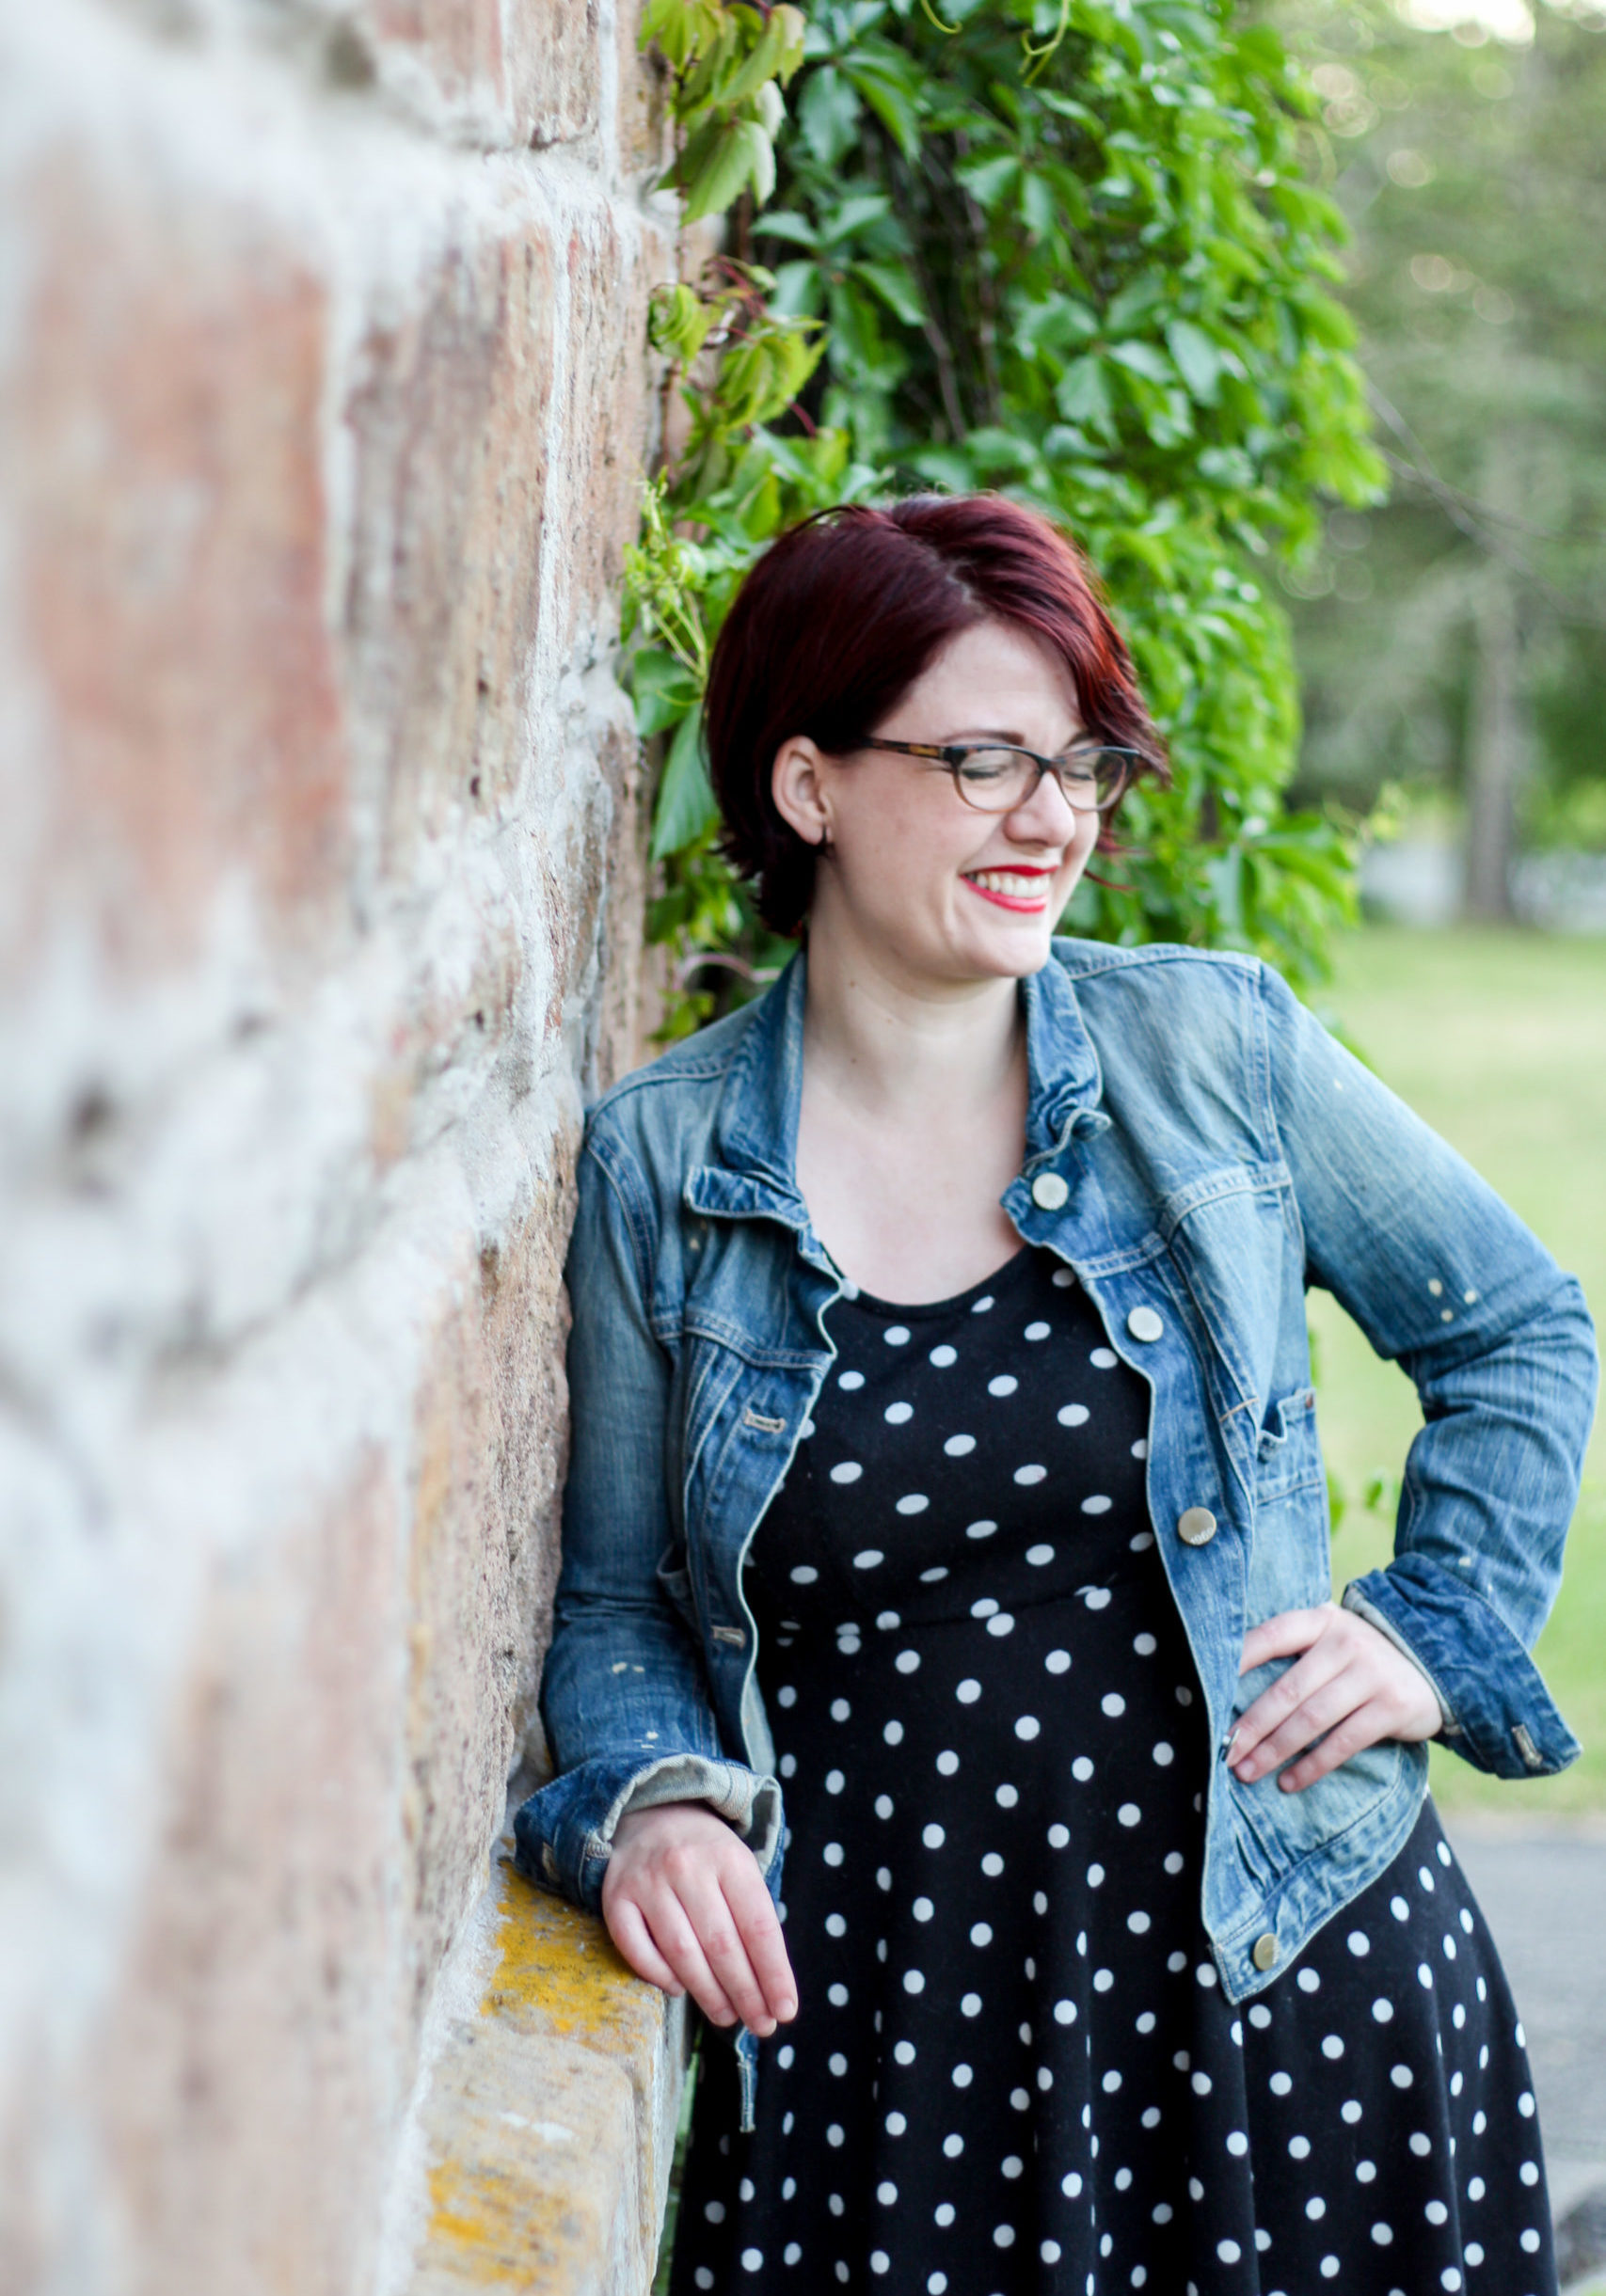 Kris is leaning against an old brick wall, laughing. She is wearing a worn jean jacket and black and white polka dot dress, with short auburn hair and glasses.